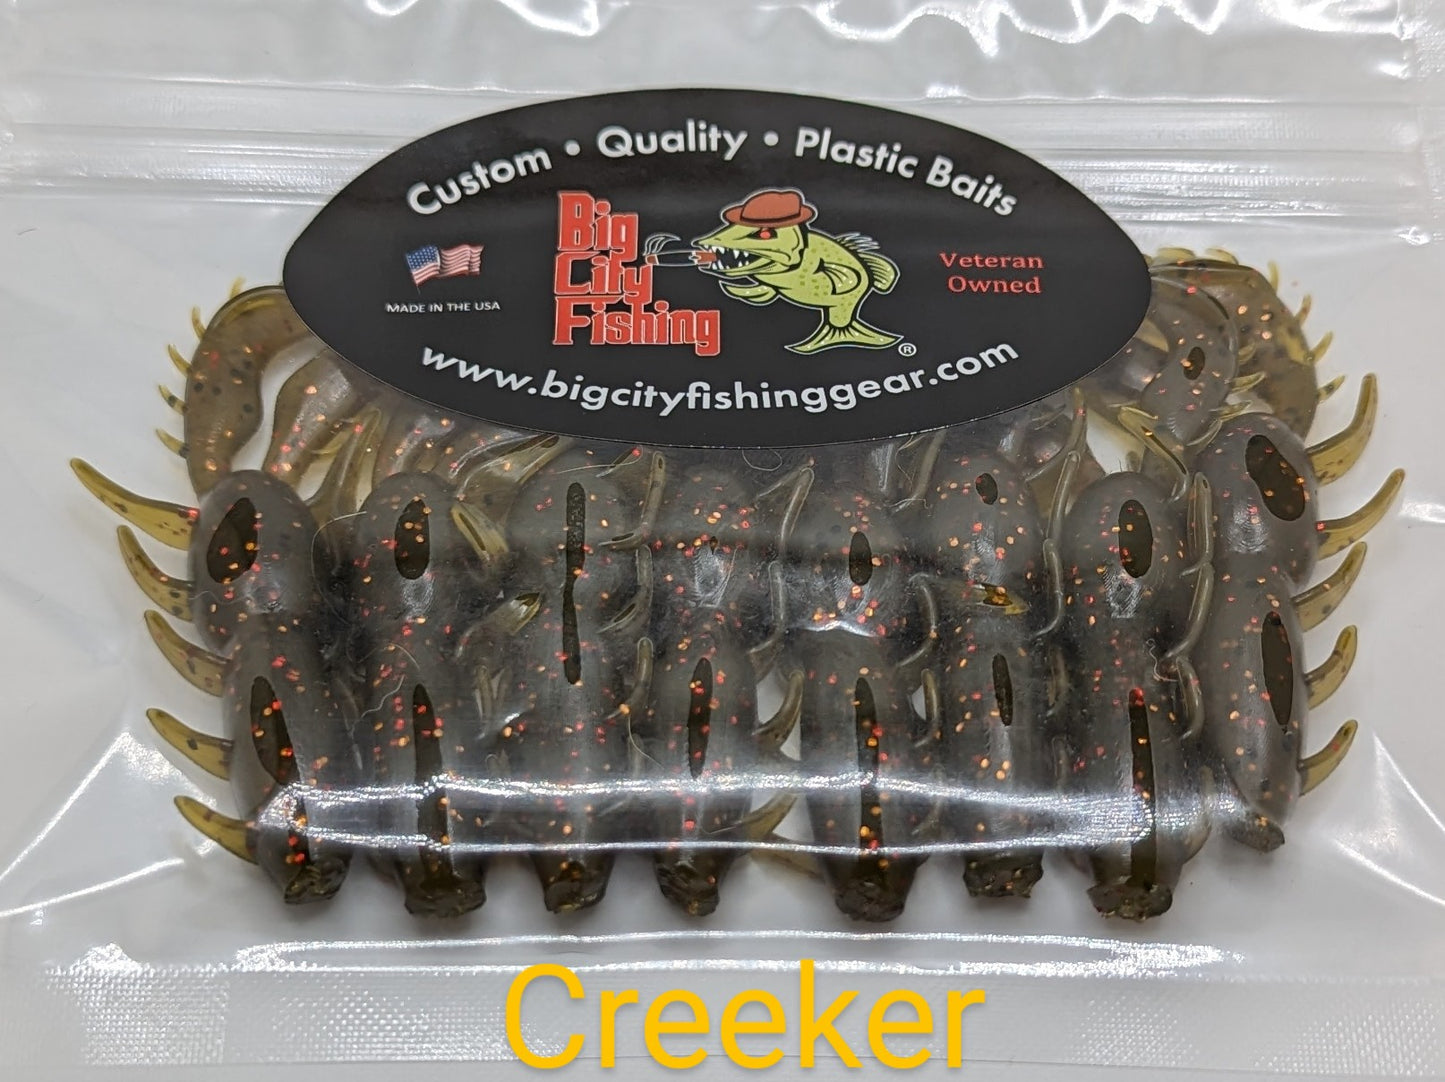 SC-10 Sniper Craw The Creeker 3.1" 8 pack